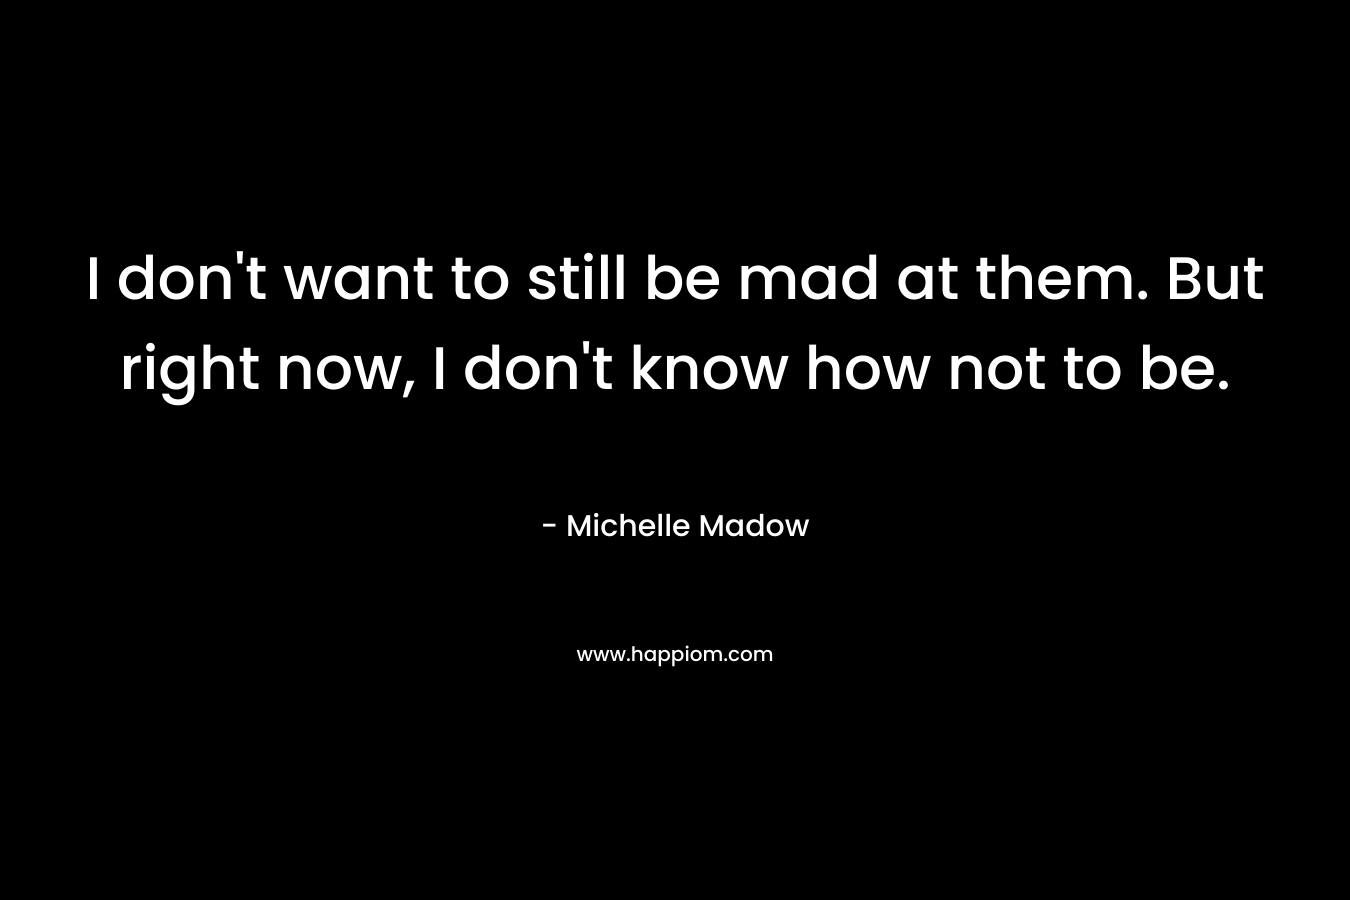 I don’t want to still be mad at them. But right now, I don’t know how not to be. – Michelle Madow